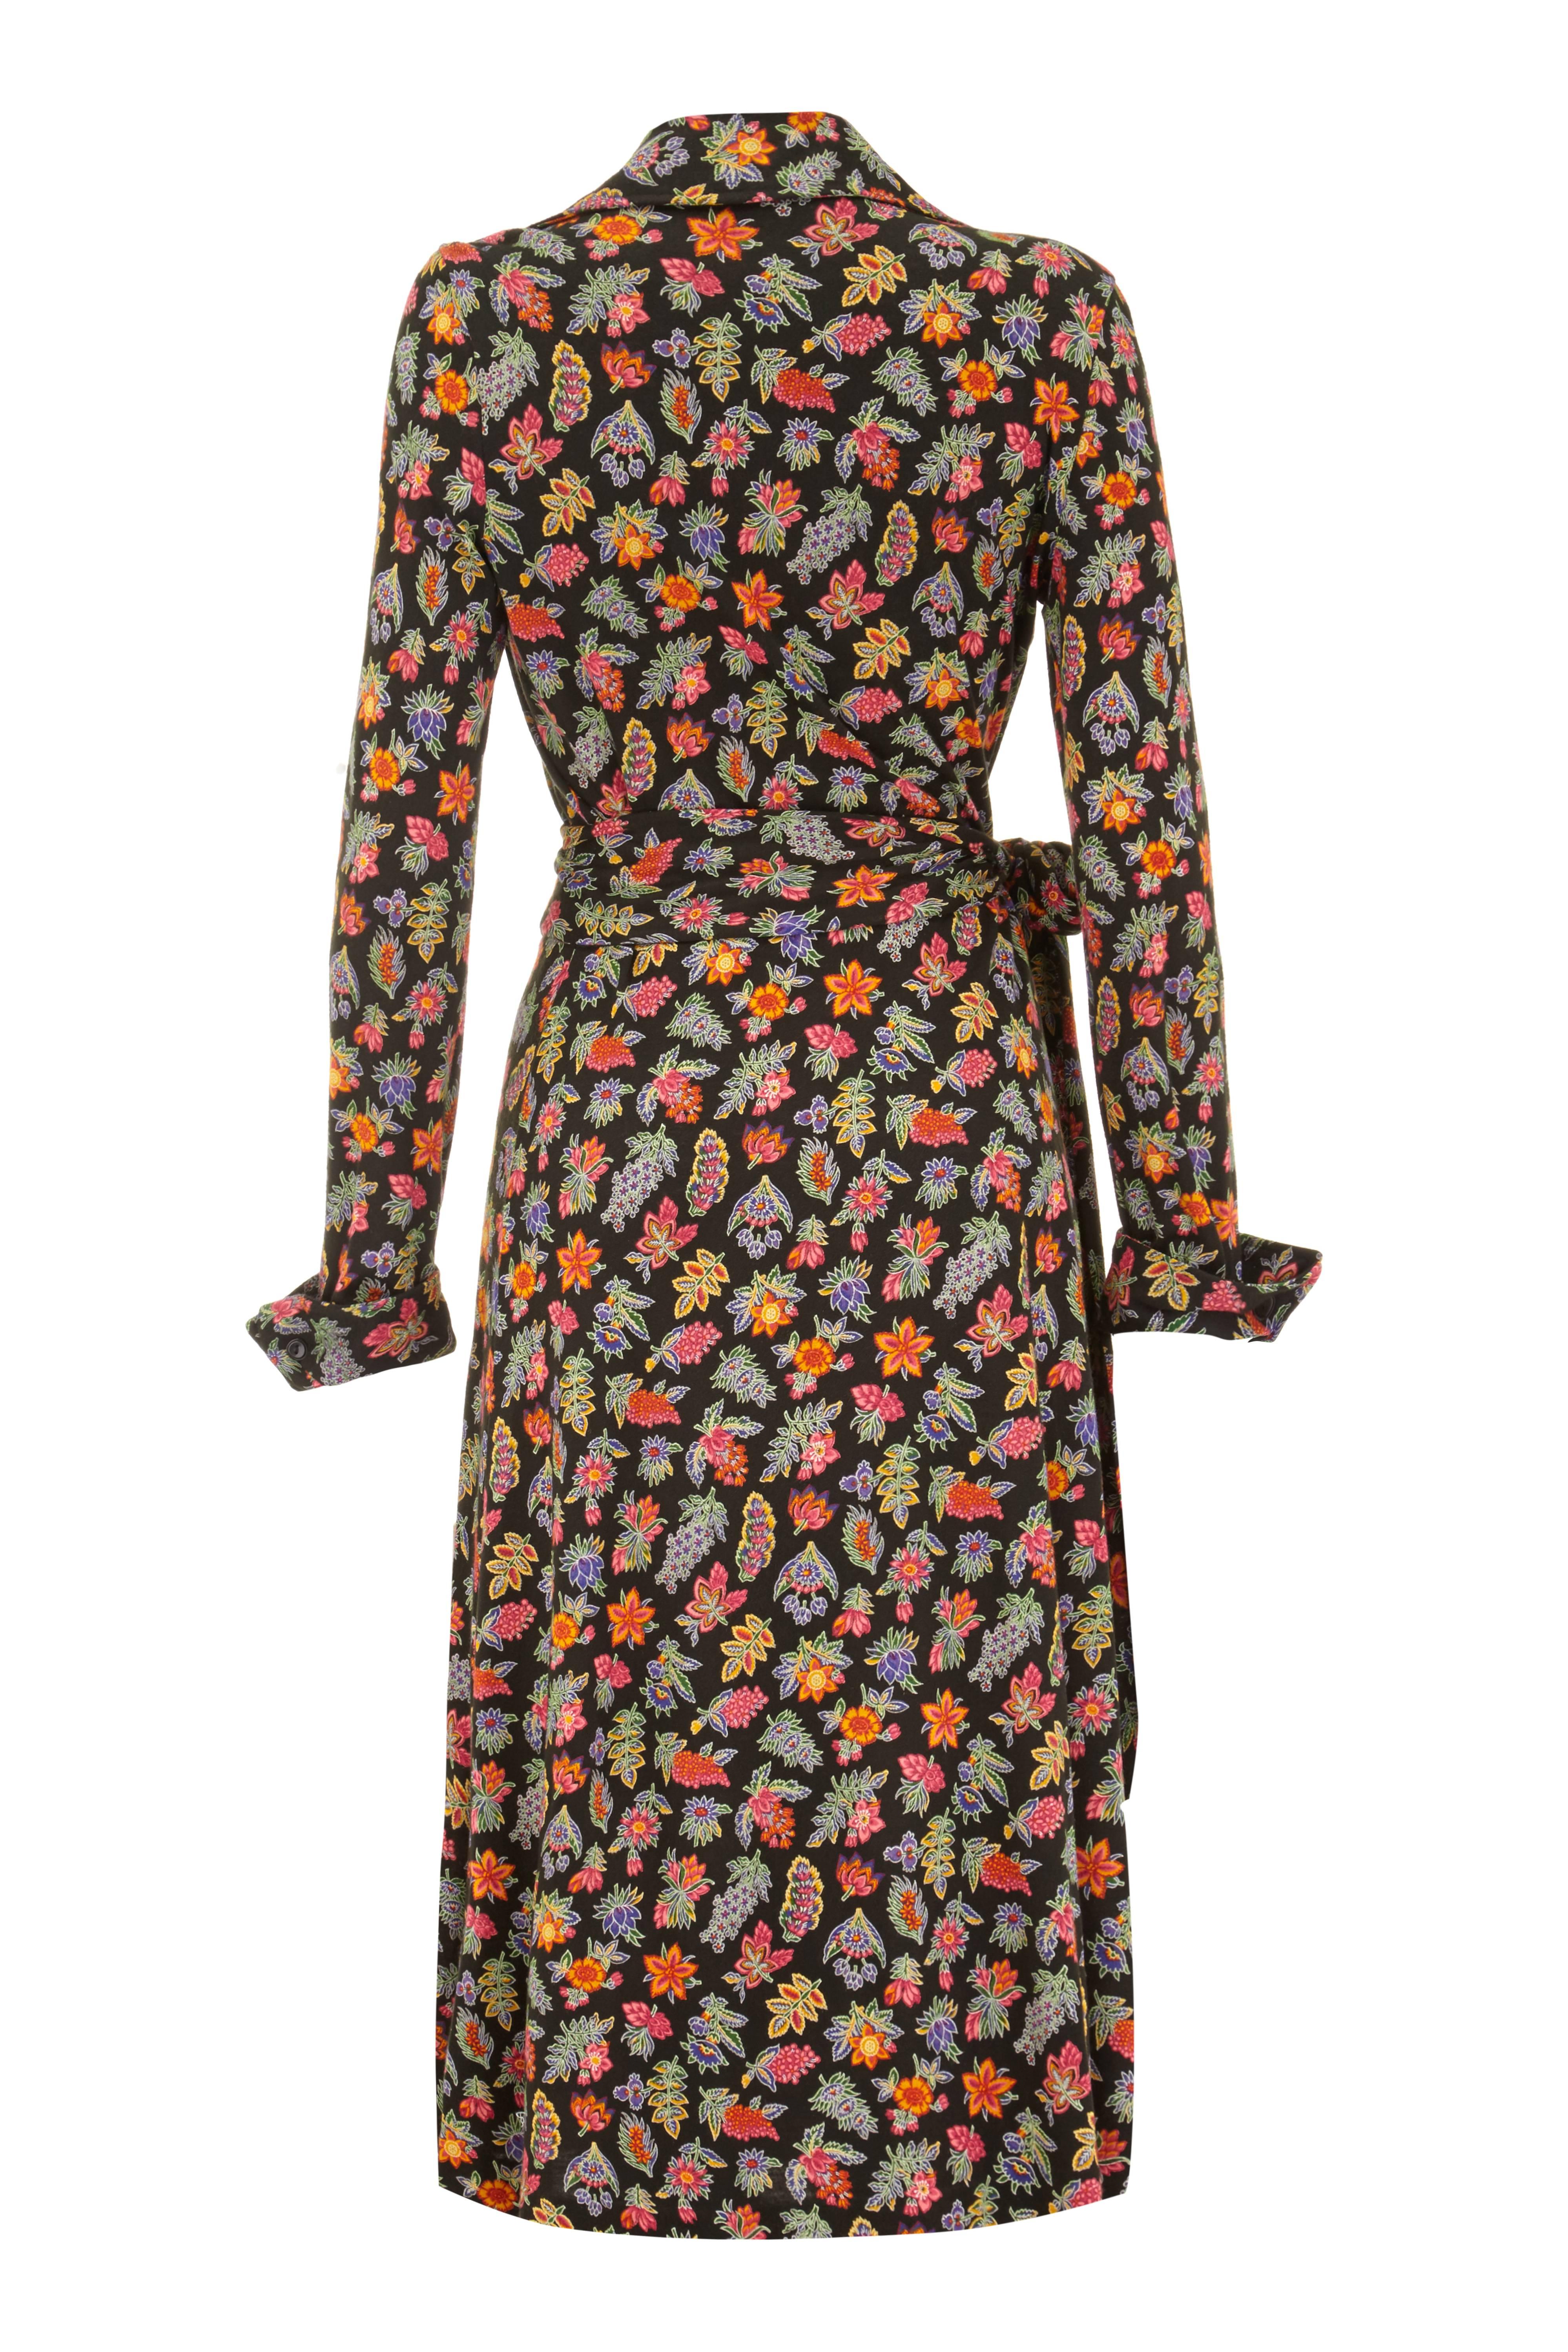 Classic 1970s vintage Diane von Fürstenberg black acrylic jersey wrap dress with colourful floral and leaf print.  This piece features long sleeves with slightly exaggerated turn up cuffs with button fastenings and wrap over front with tie